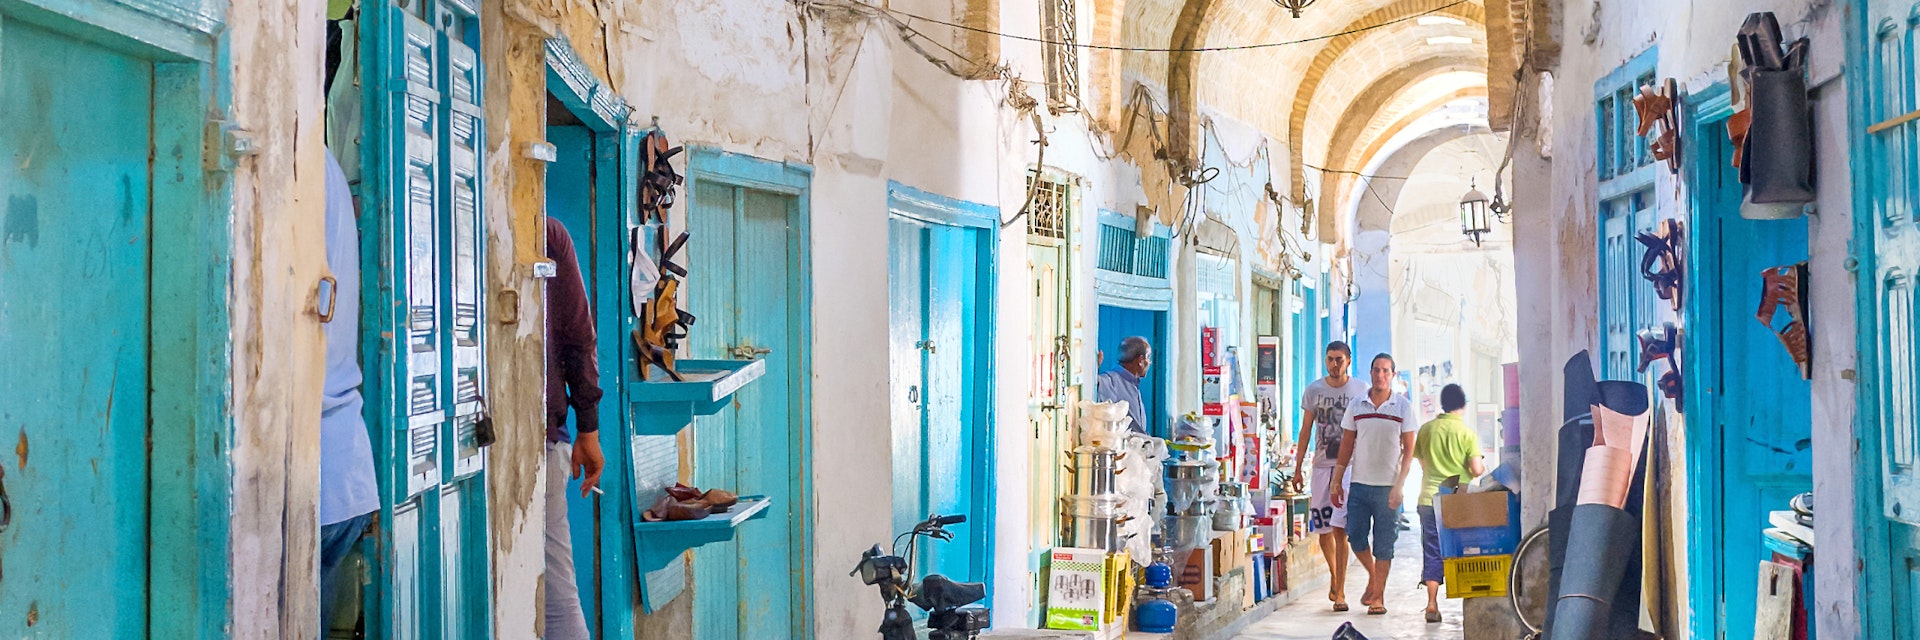 Kairouan, Tunisia - August 30, 2015: Almost all the stalls in Souq El-Blaghija market are closed after midday that's why it could be used as parking for cycles and scooters.